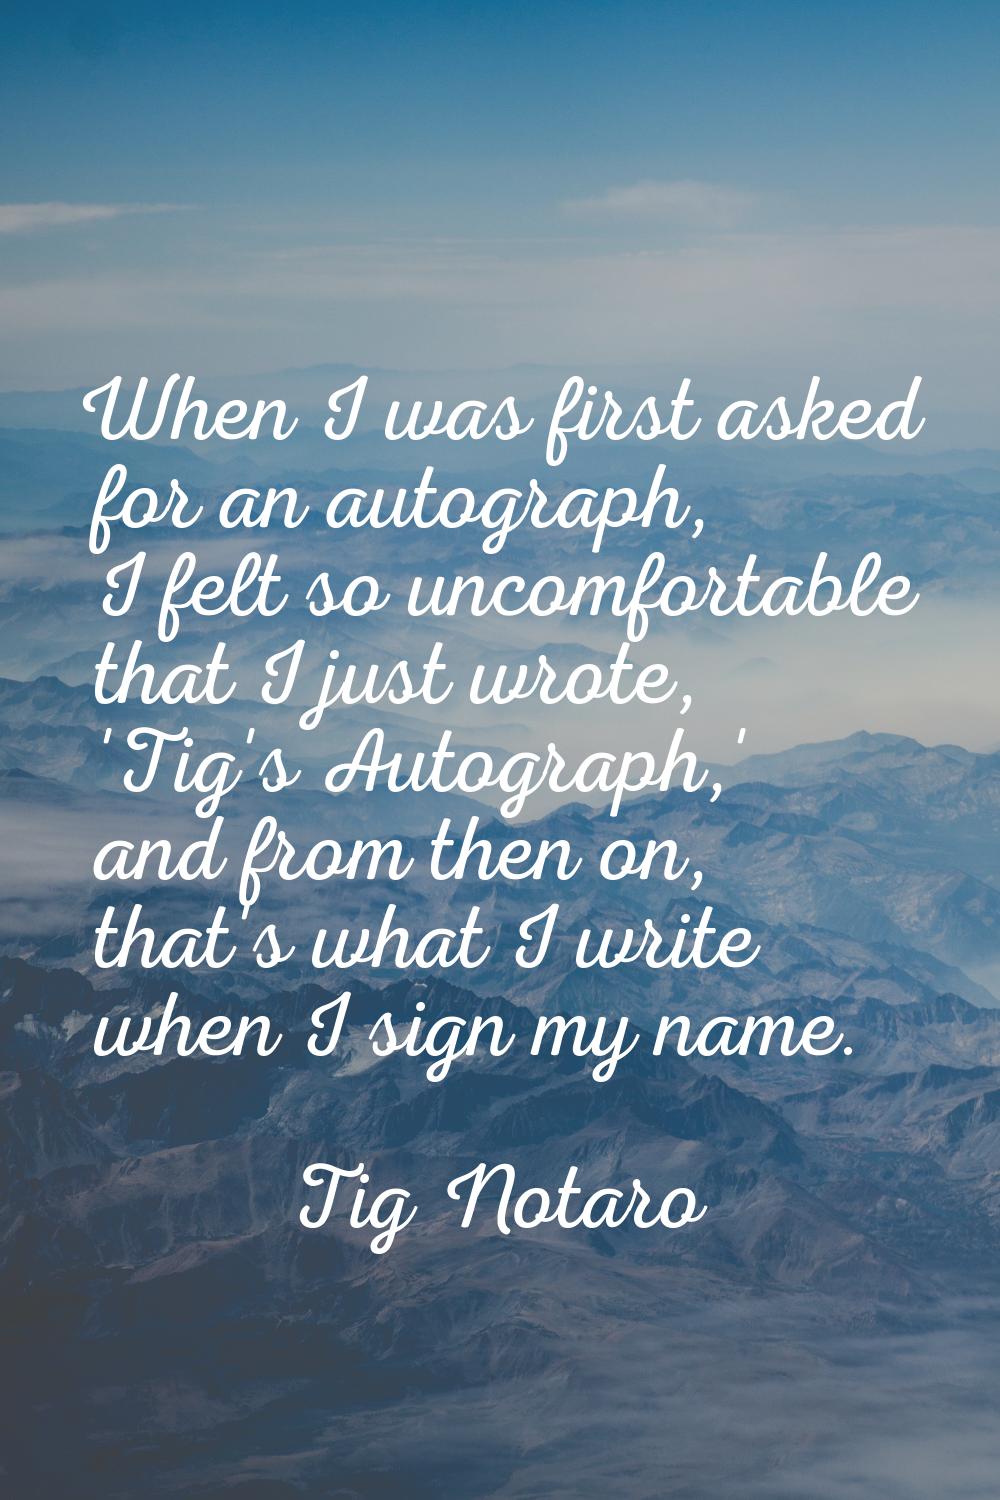 When I was first asked for an autograph, I felt so uncomfortable that I just wrote, 'Tig's Autograp